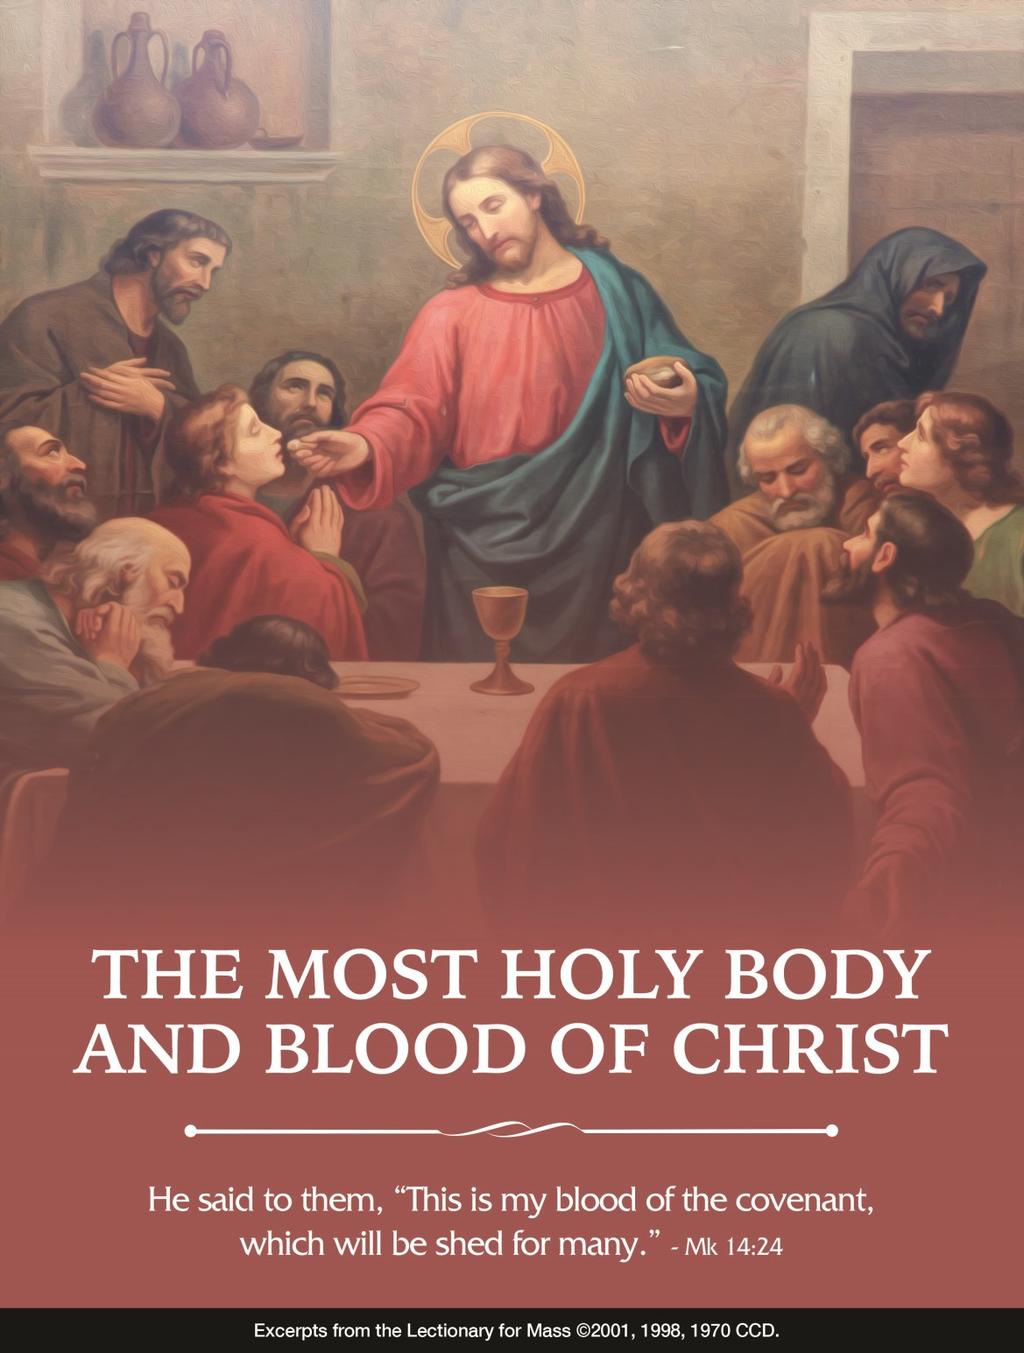 We have mentioned many times that all revolves around the Eucharist when we receive the real Body and Blood of the Lord.